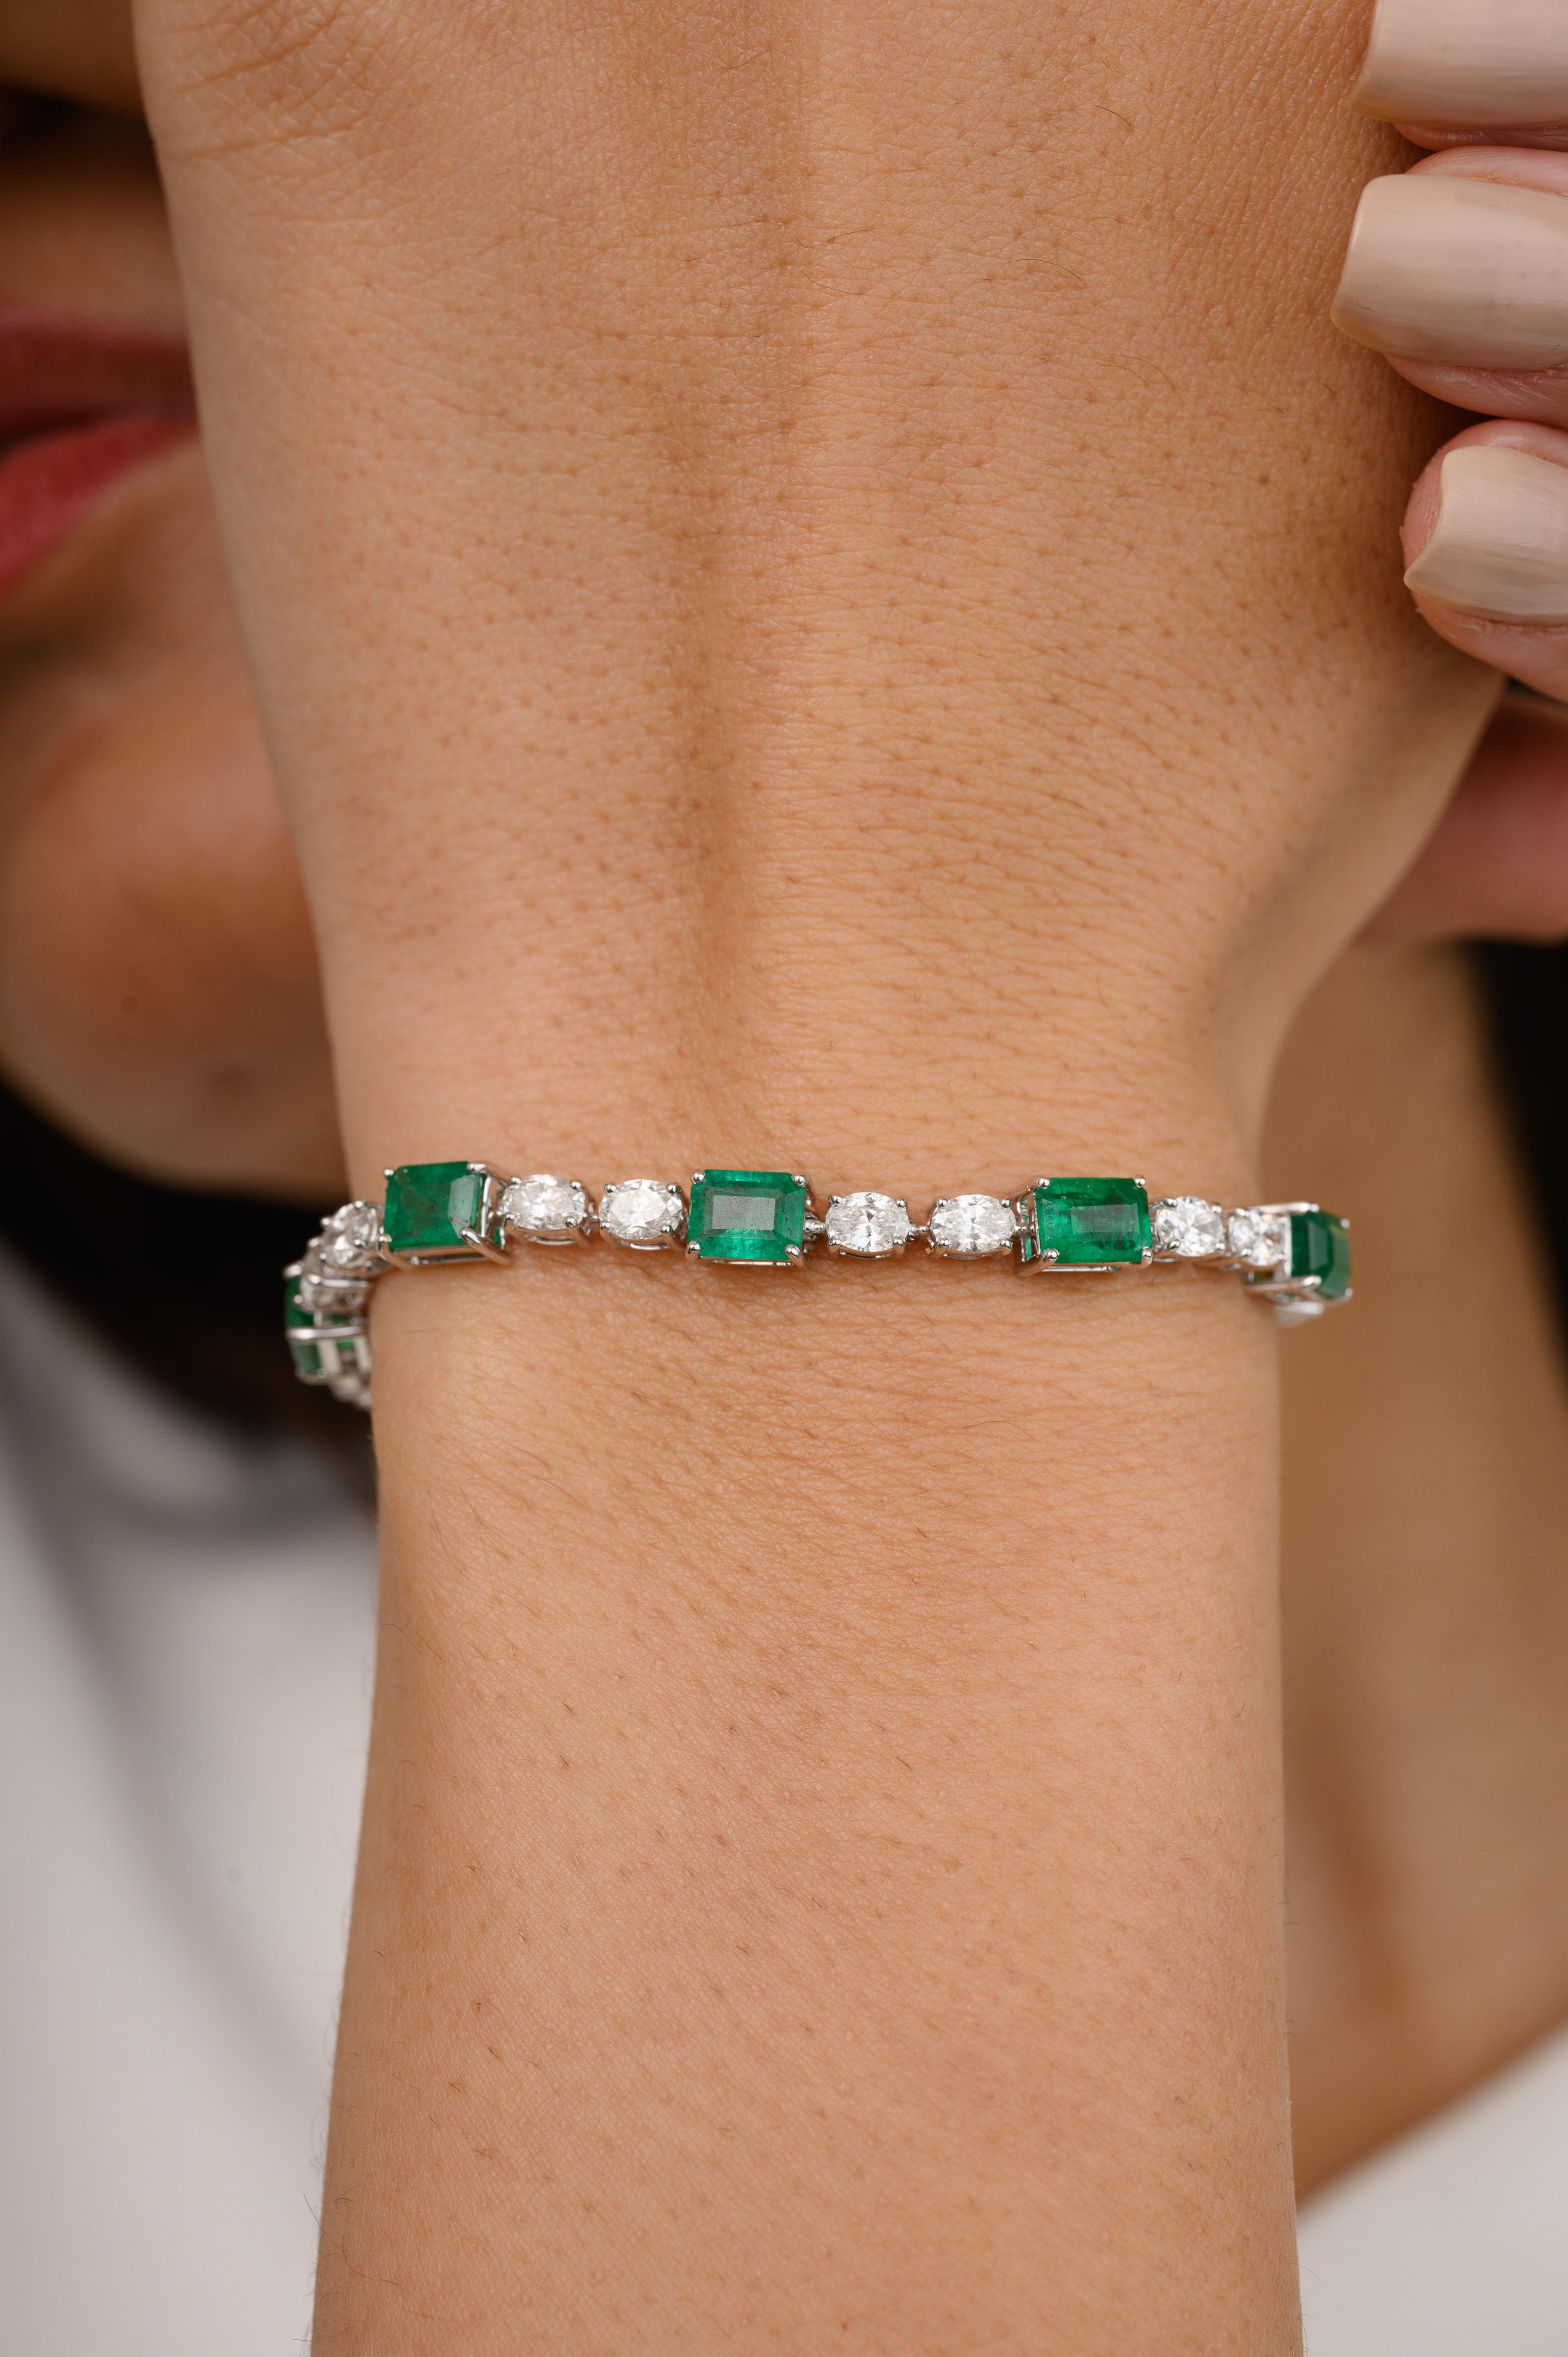 This 4.11 CTW Emerald and 2.24 CTW Diamond Tennis Bracelet in 18K gold showcases endlessly sparkling natural emerald, weighing 4.11 carat and diamonds weighing 2.24 carats. It measures 6.5 inches long in length. 
Emerald enhances intellectual